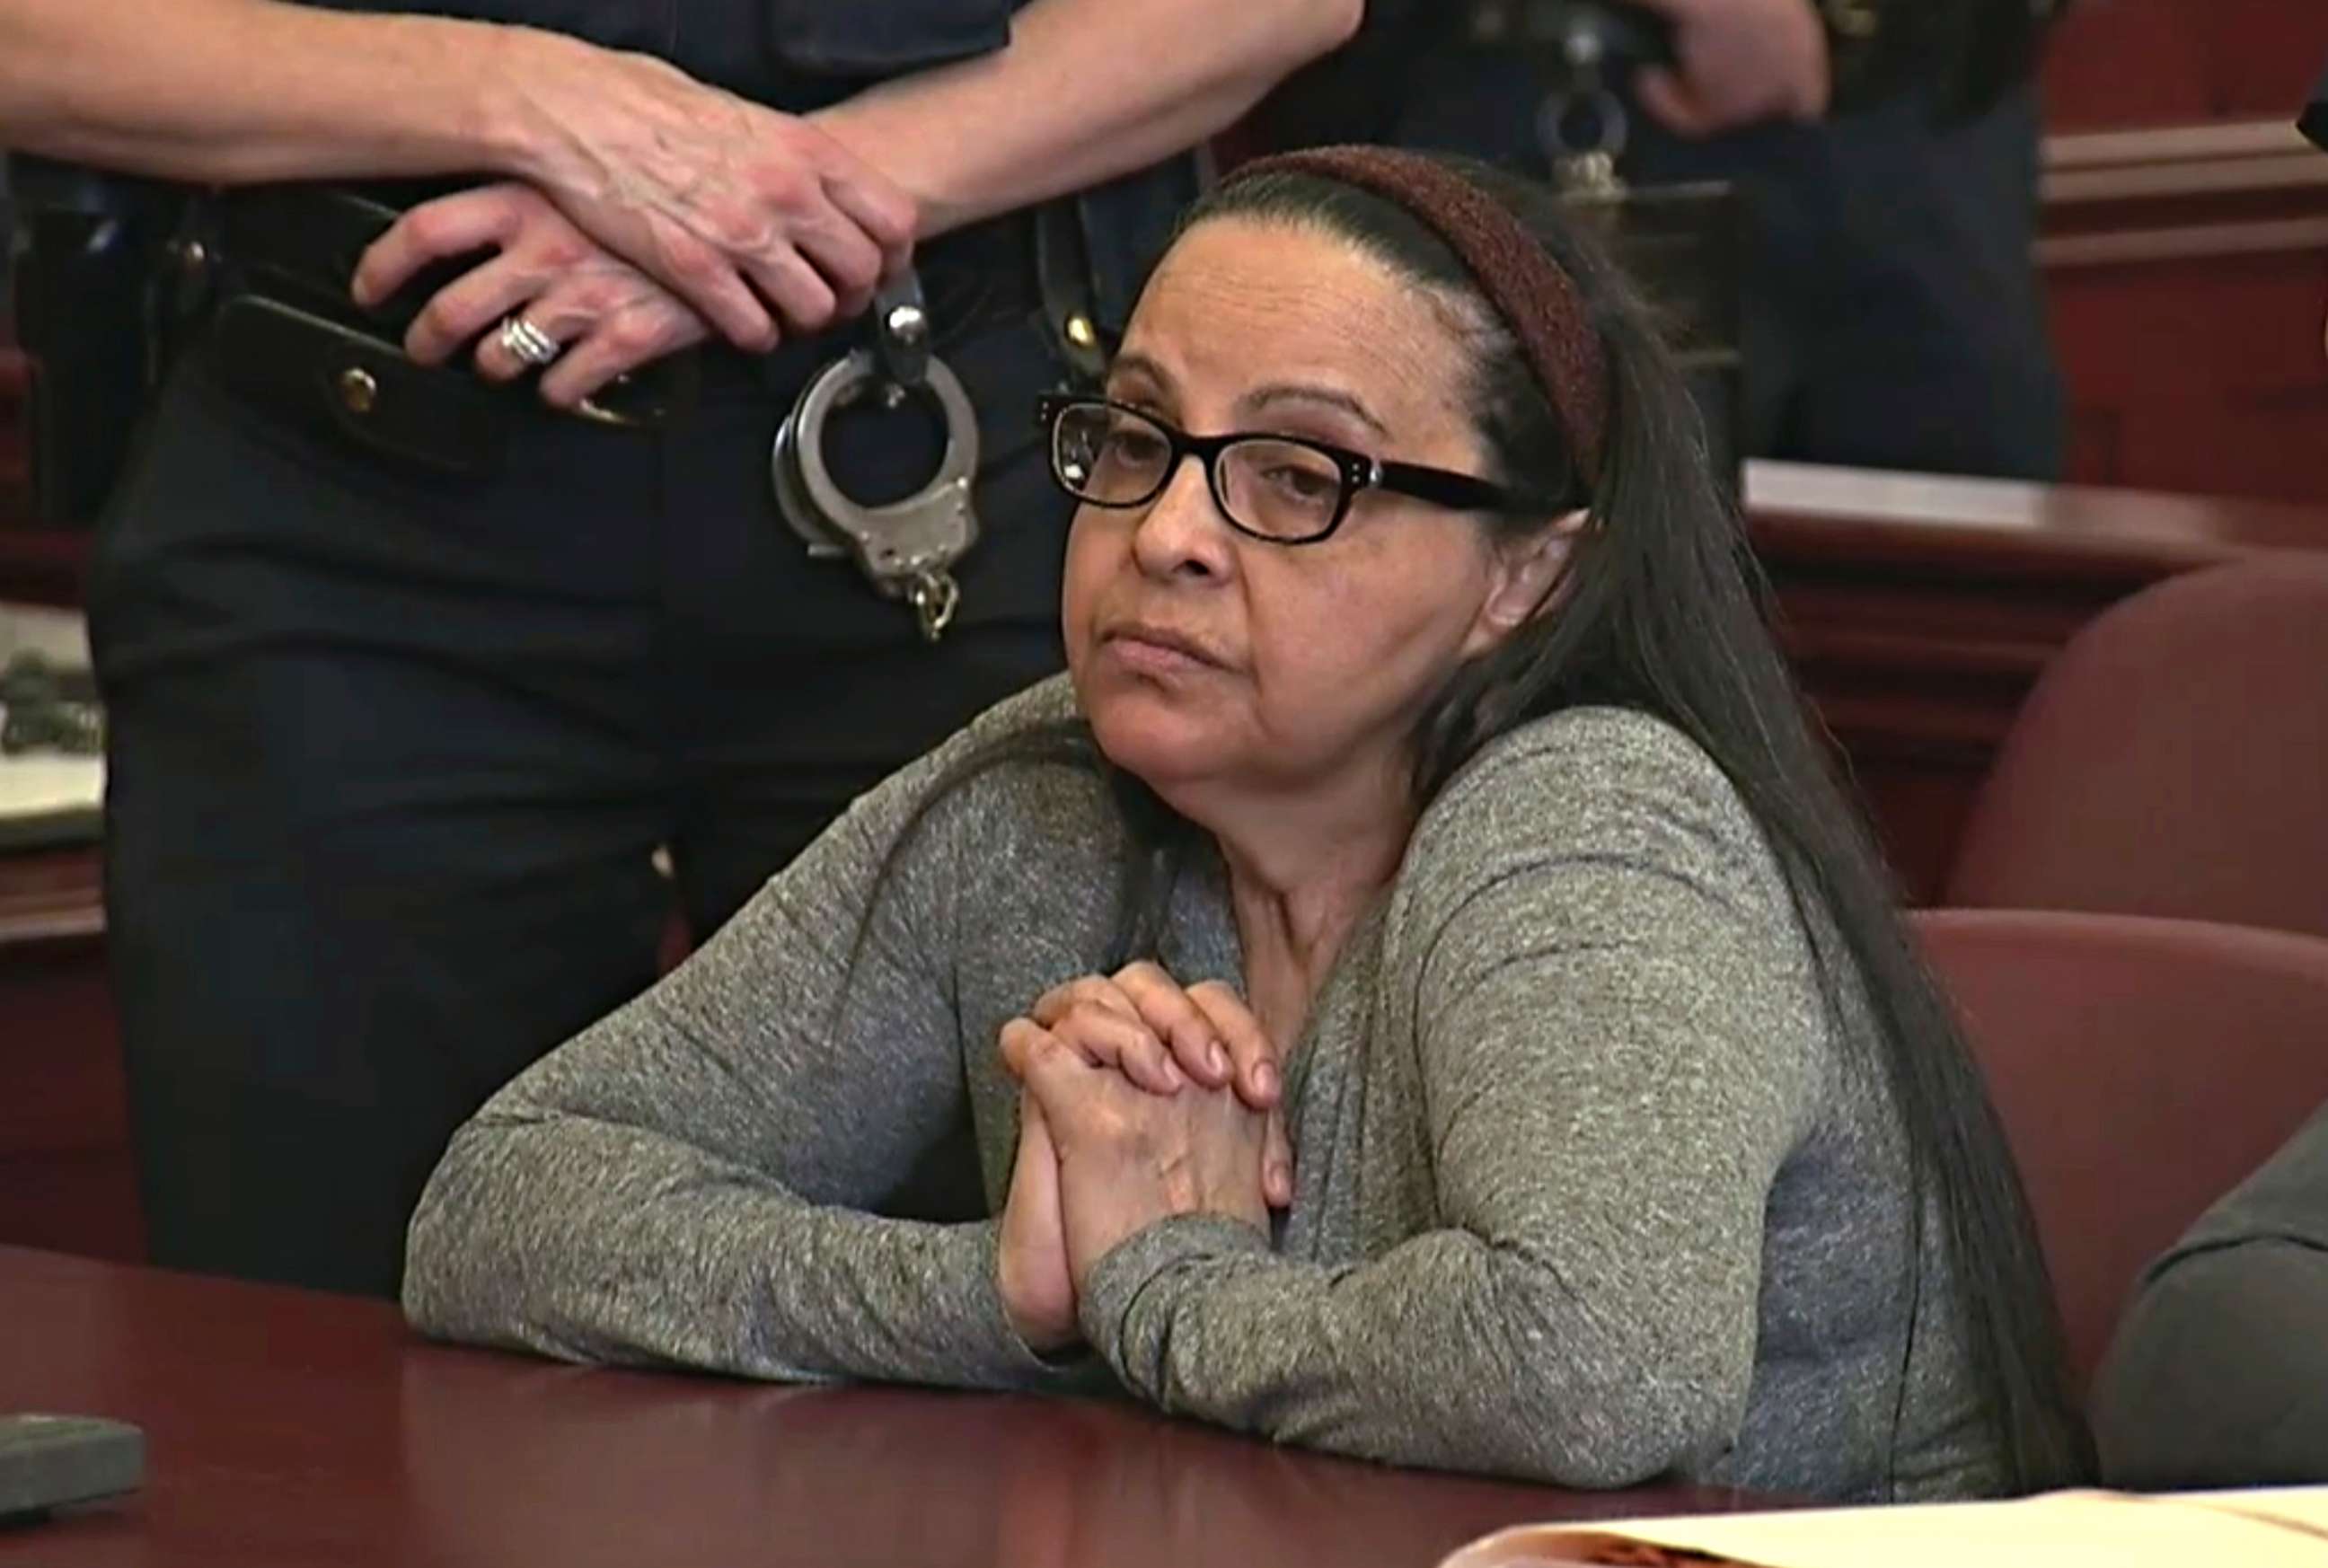 PHOTO: In this still image from video, Yoselyn Ortega, a nanny employed by the Krim family, listens to court proceedings during the first day of her murder trial for the deaths of the two children in her care, in New York City, March 1, 2018.  